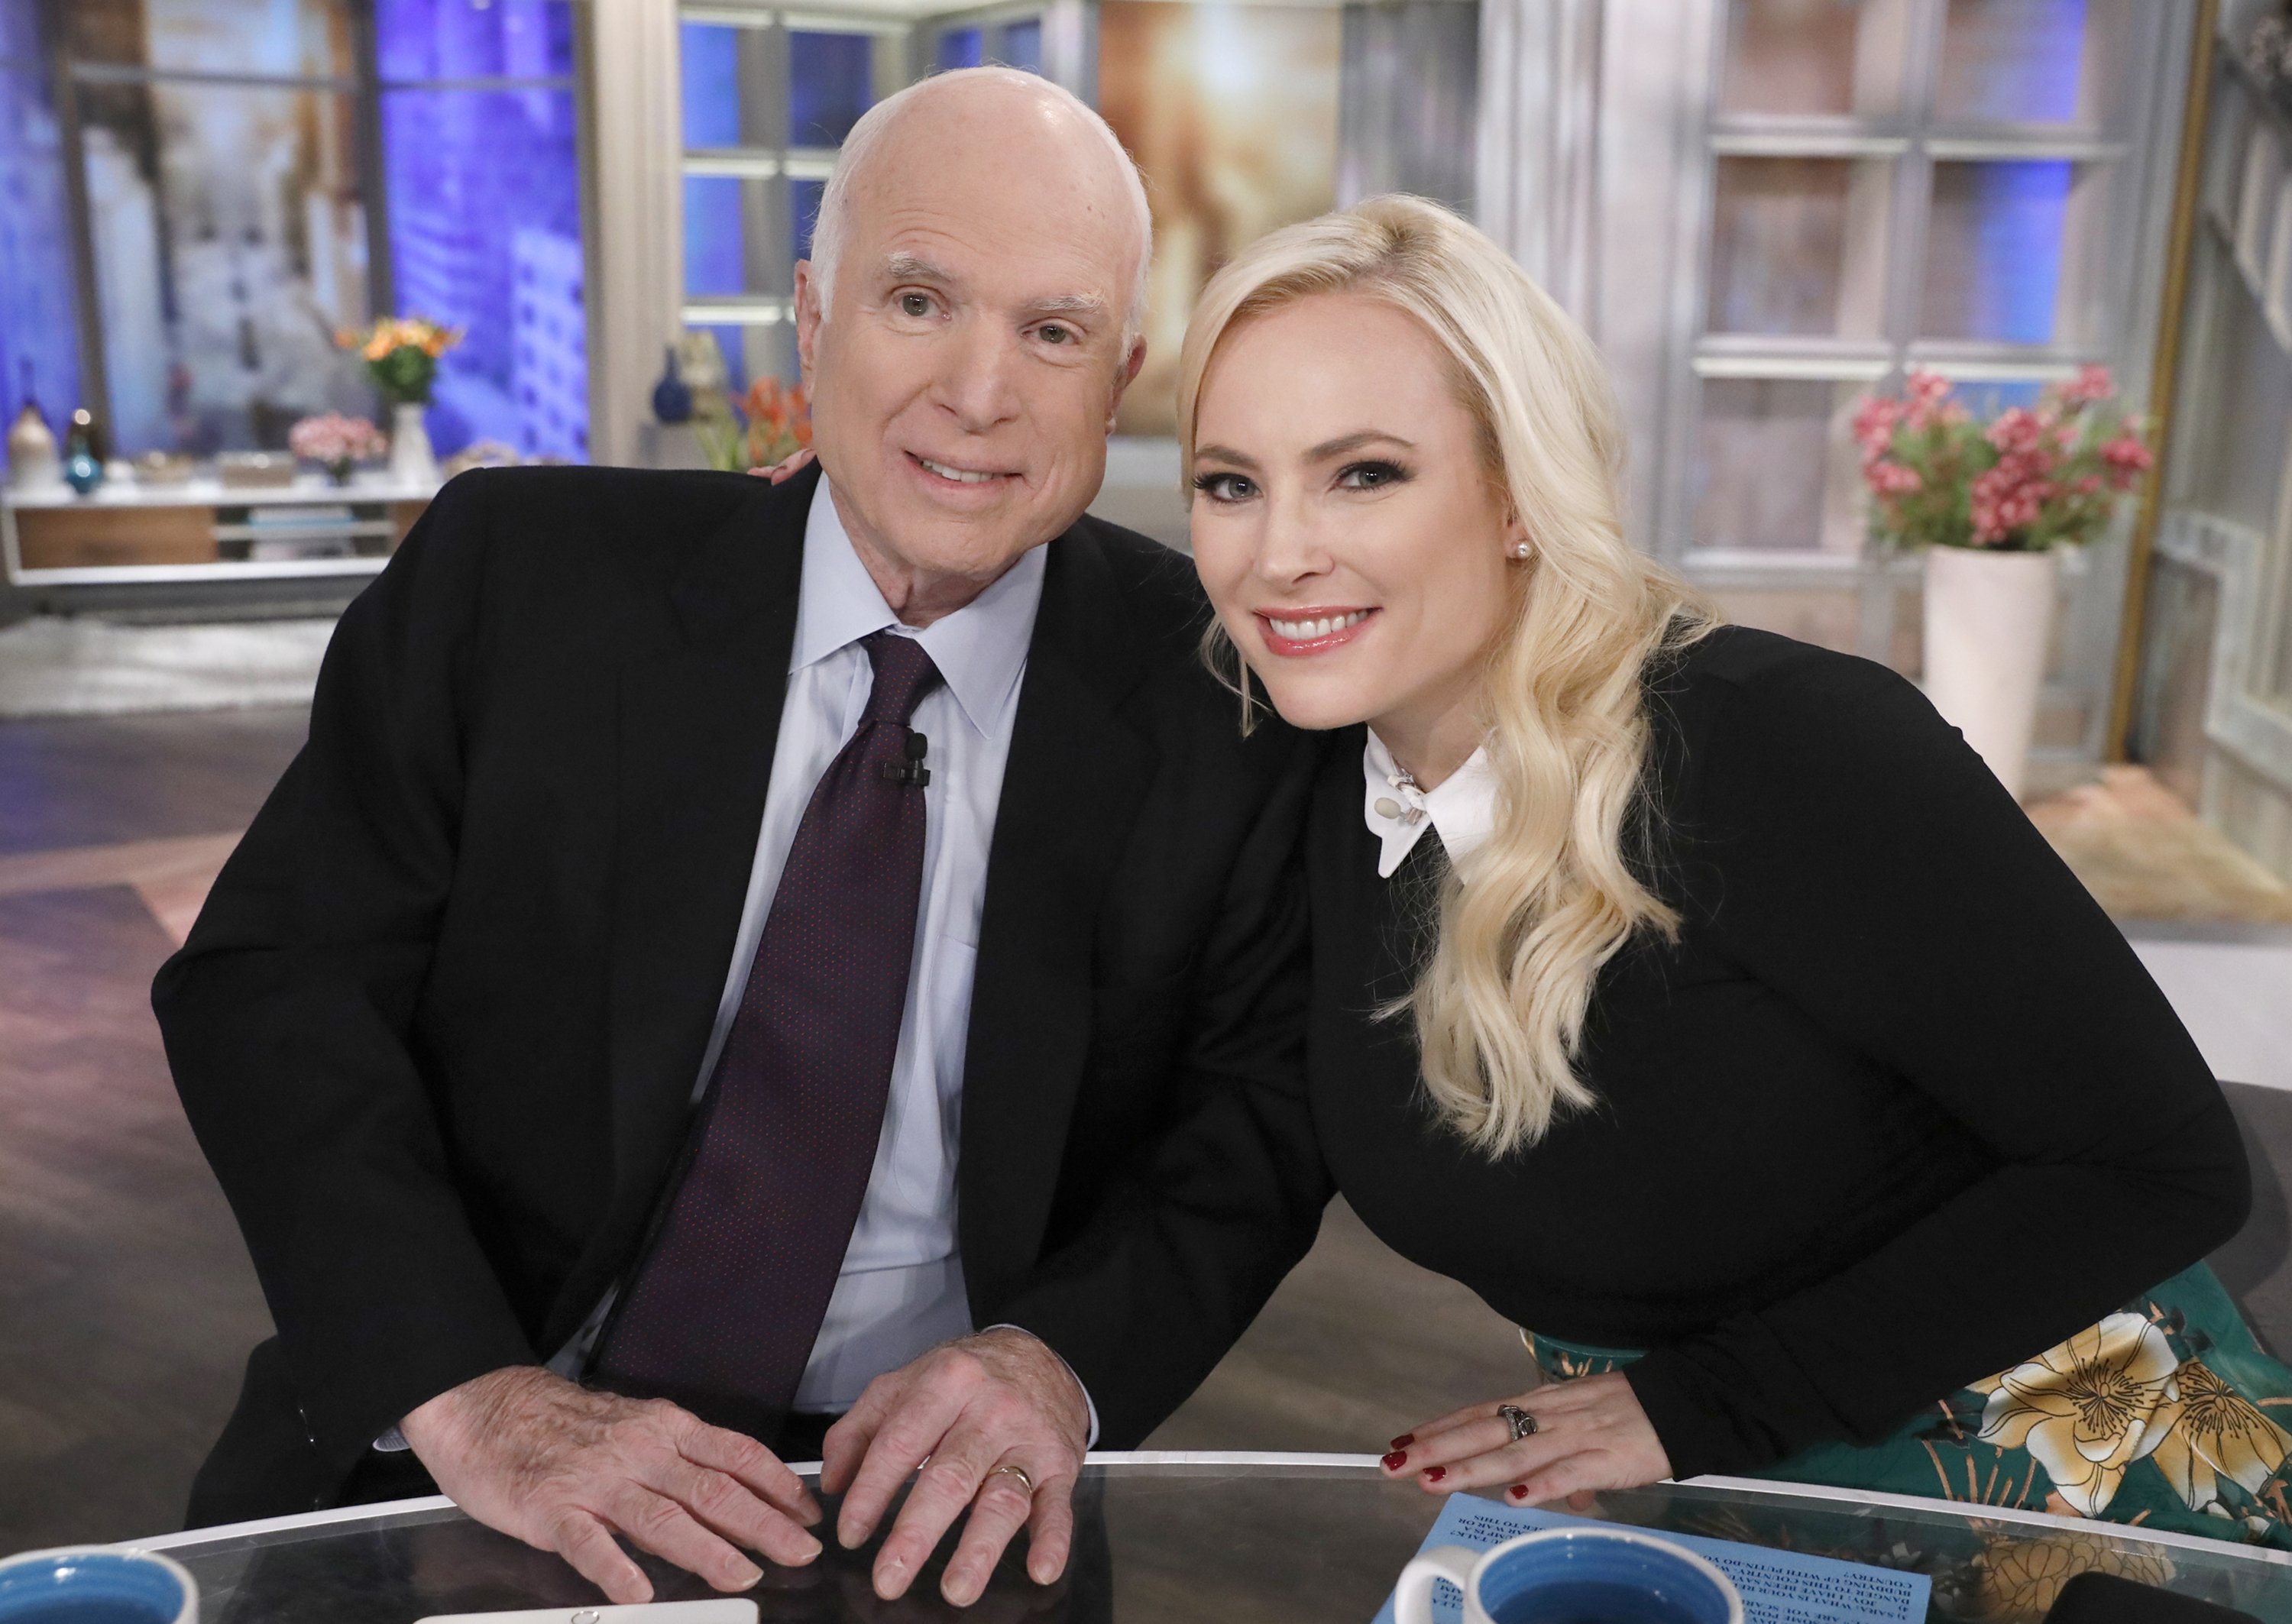 John McCain and daughter Meghan McCain on "The View" on October 23, 2017 | Photo: Getty Images